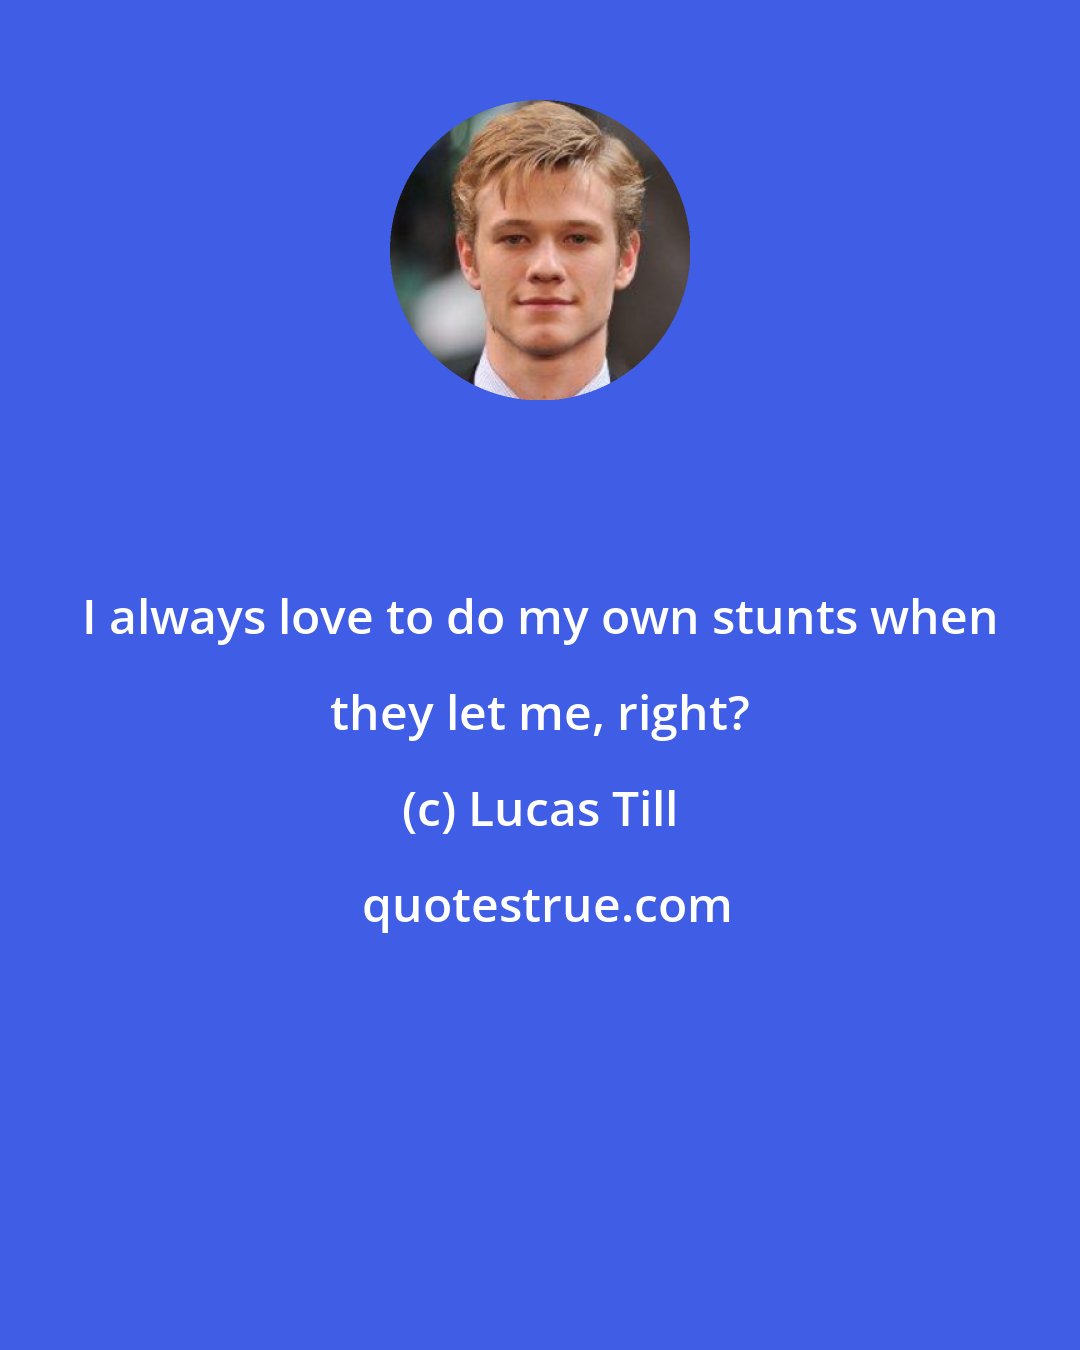 Lucas Till: I always love to do my own stunts when they let me, right?